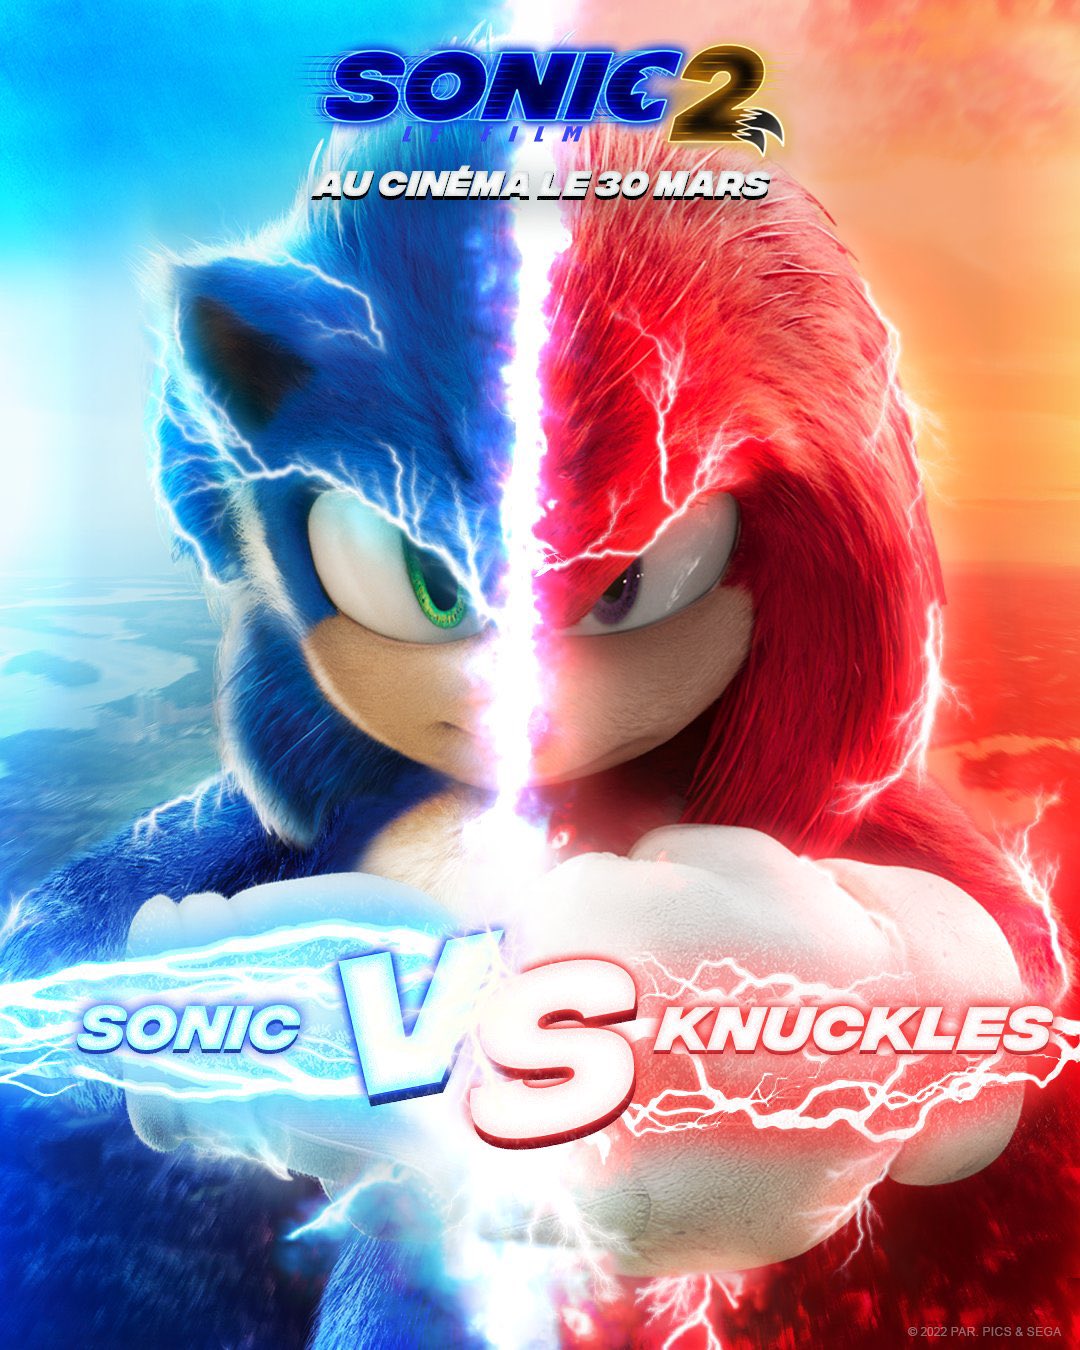 Dennis デニス on X: The Japanese Sonic movie 2 poster has some differences.  Sonic is a lighter shade of blue, Tom & Maddie are mirrored, Knuckles is  bigger, there's more of Robotnik